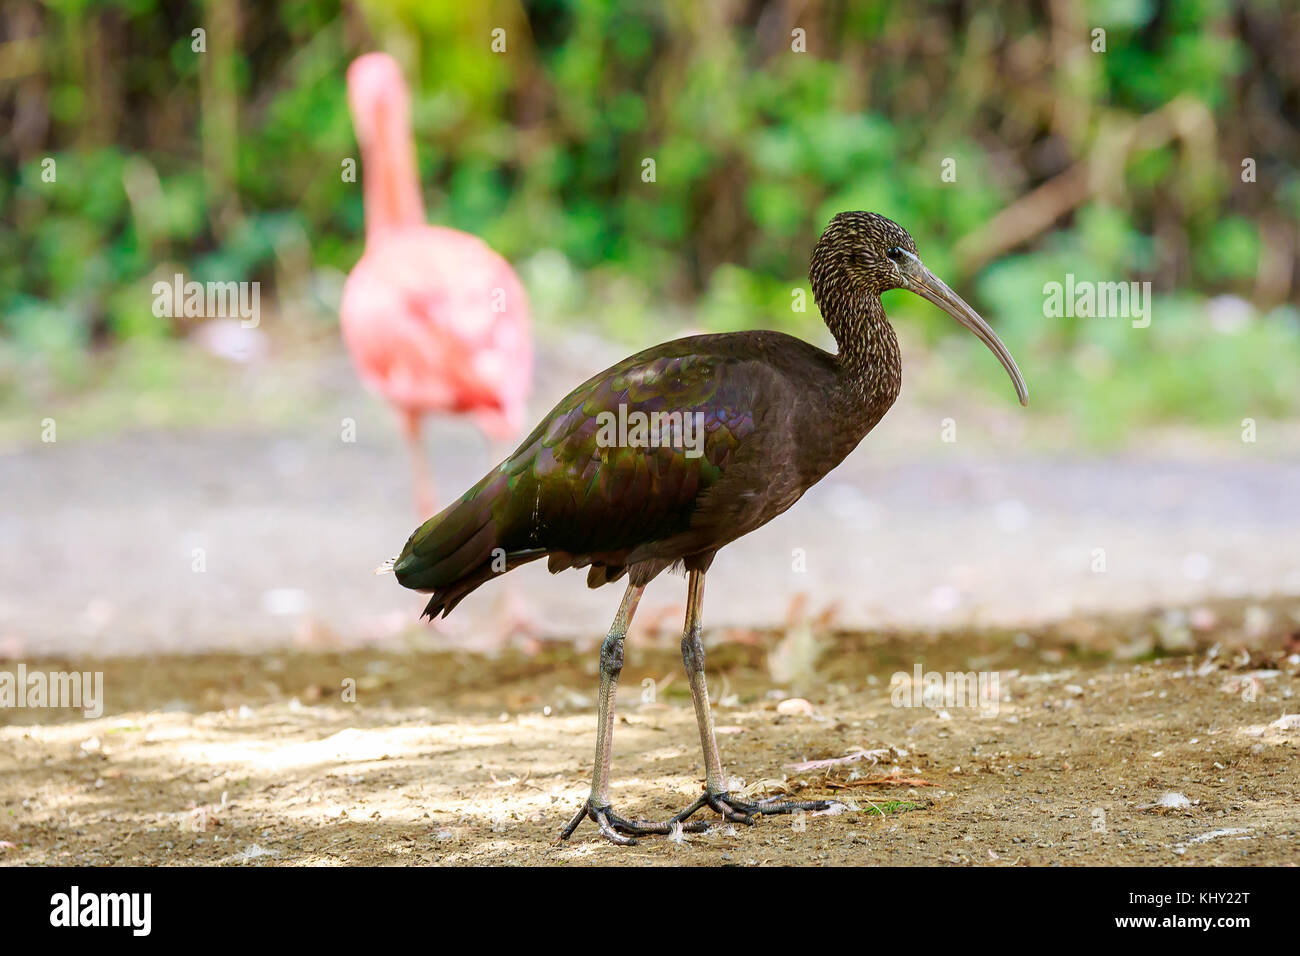 Glossy ibis (Plegadis falcinellus) wading bird foraging in wetlands in front of a Scarlet Ibis Eudocimus ruber Stock Photo